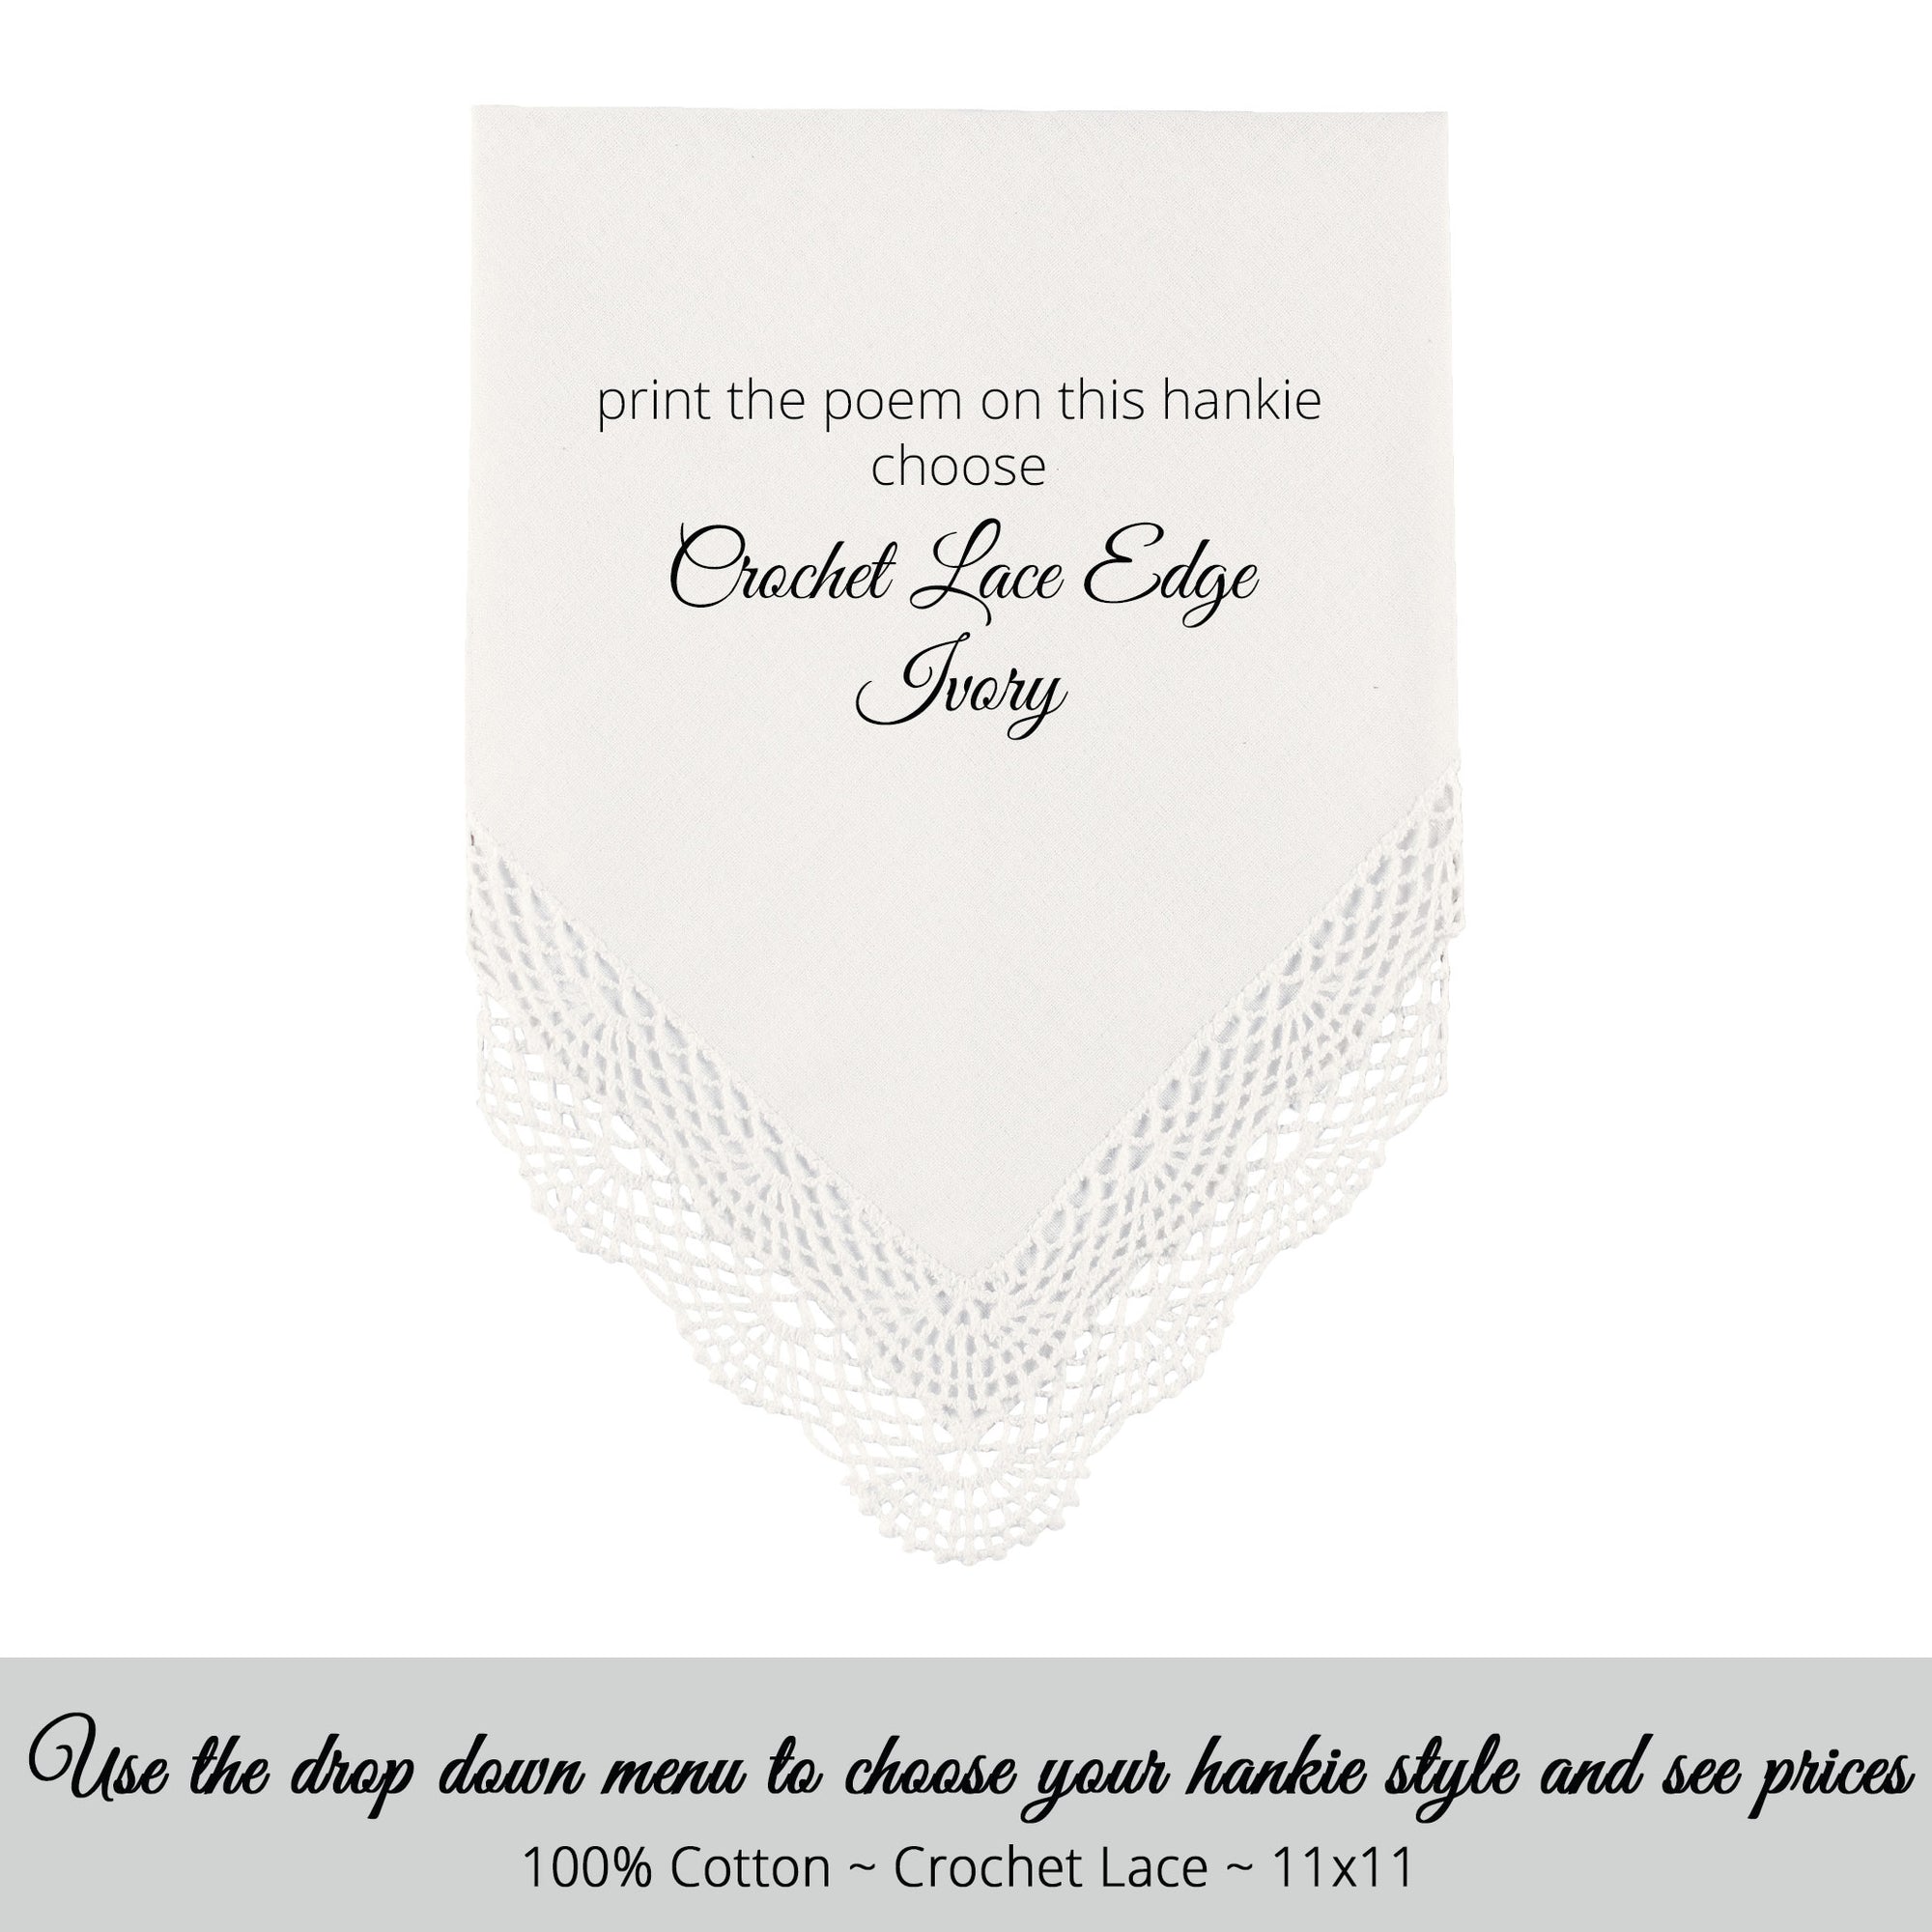 Wedding handkerchief ivory with crochet lace edge for poem printed hankie